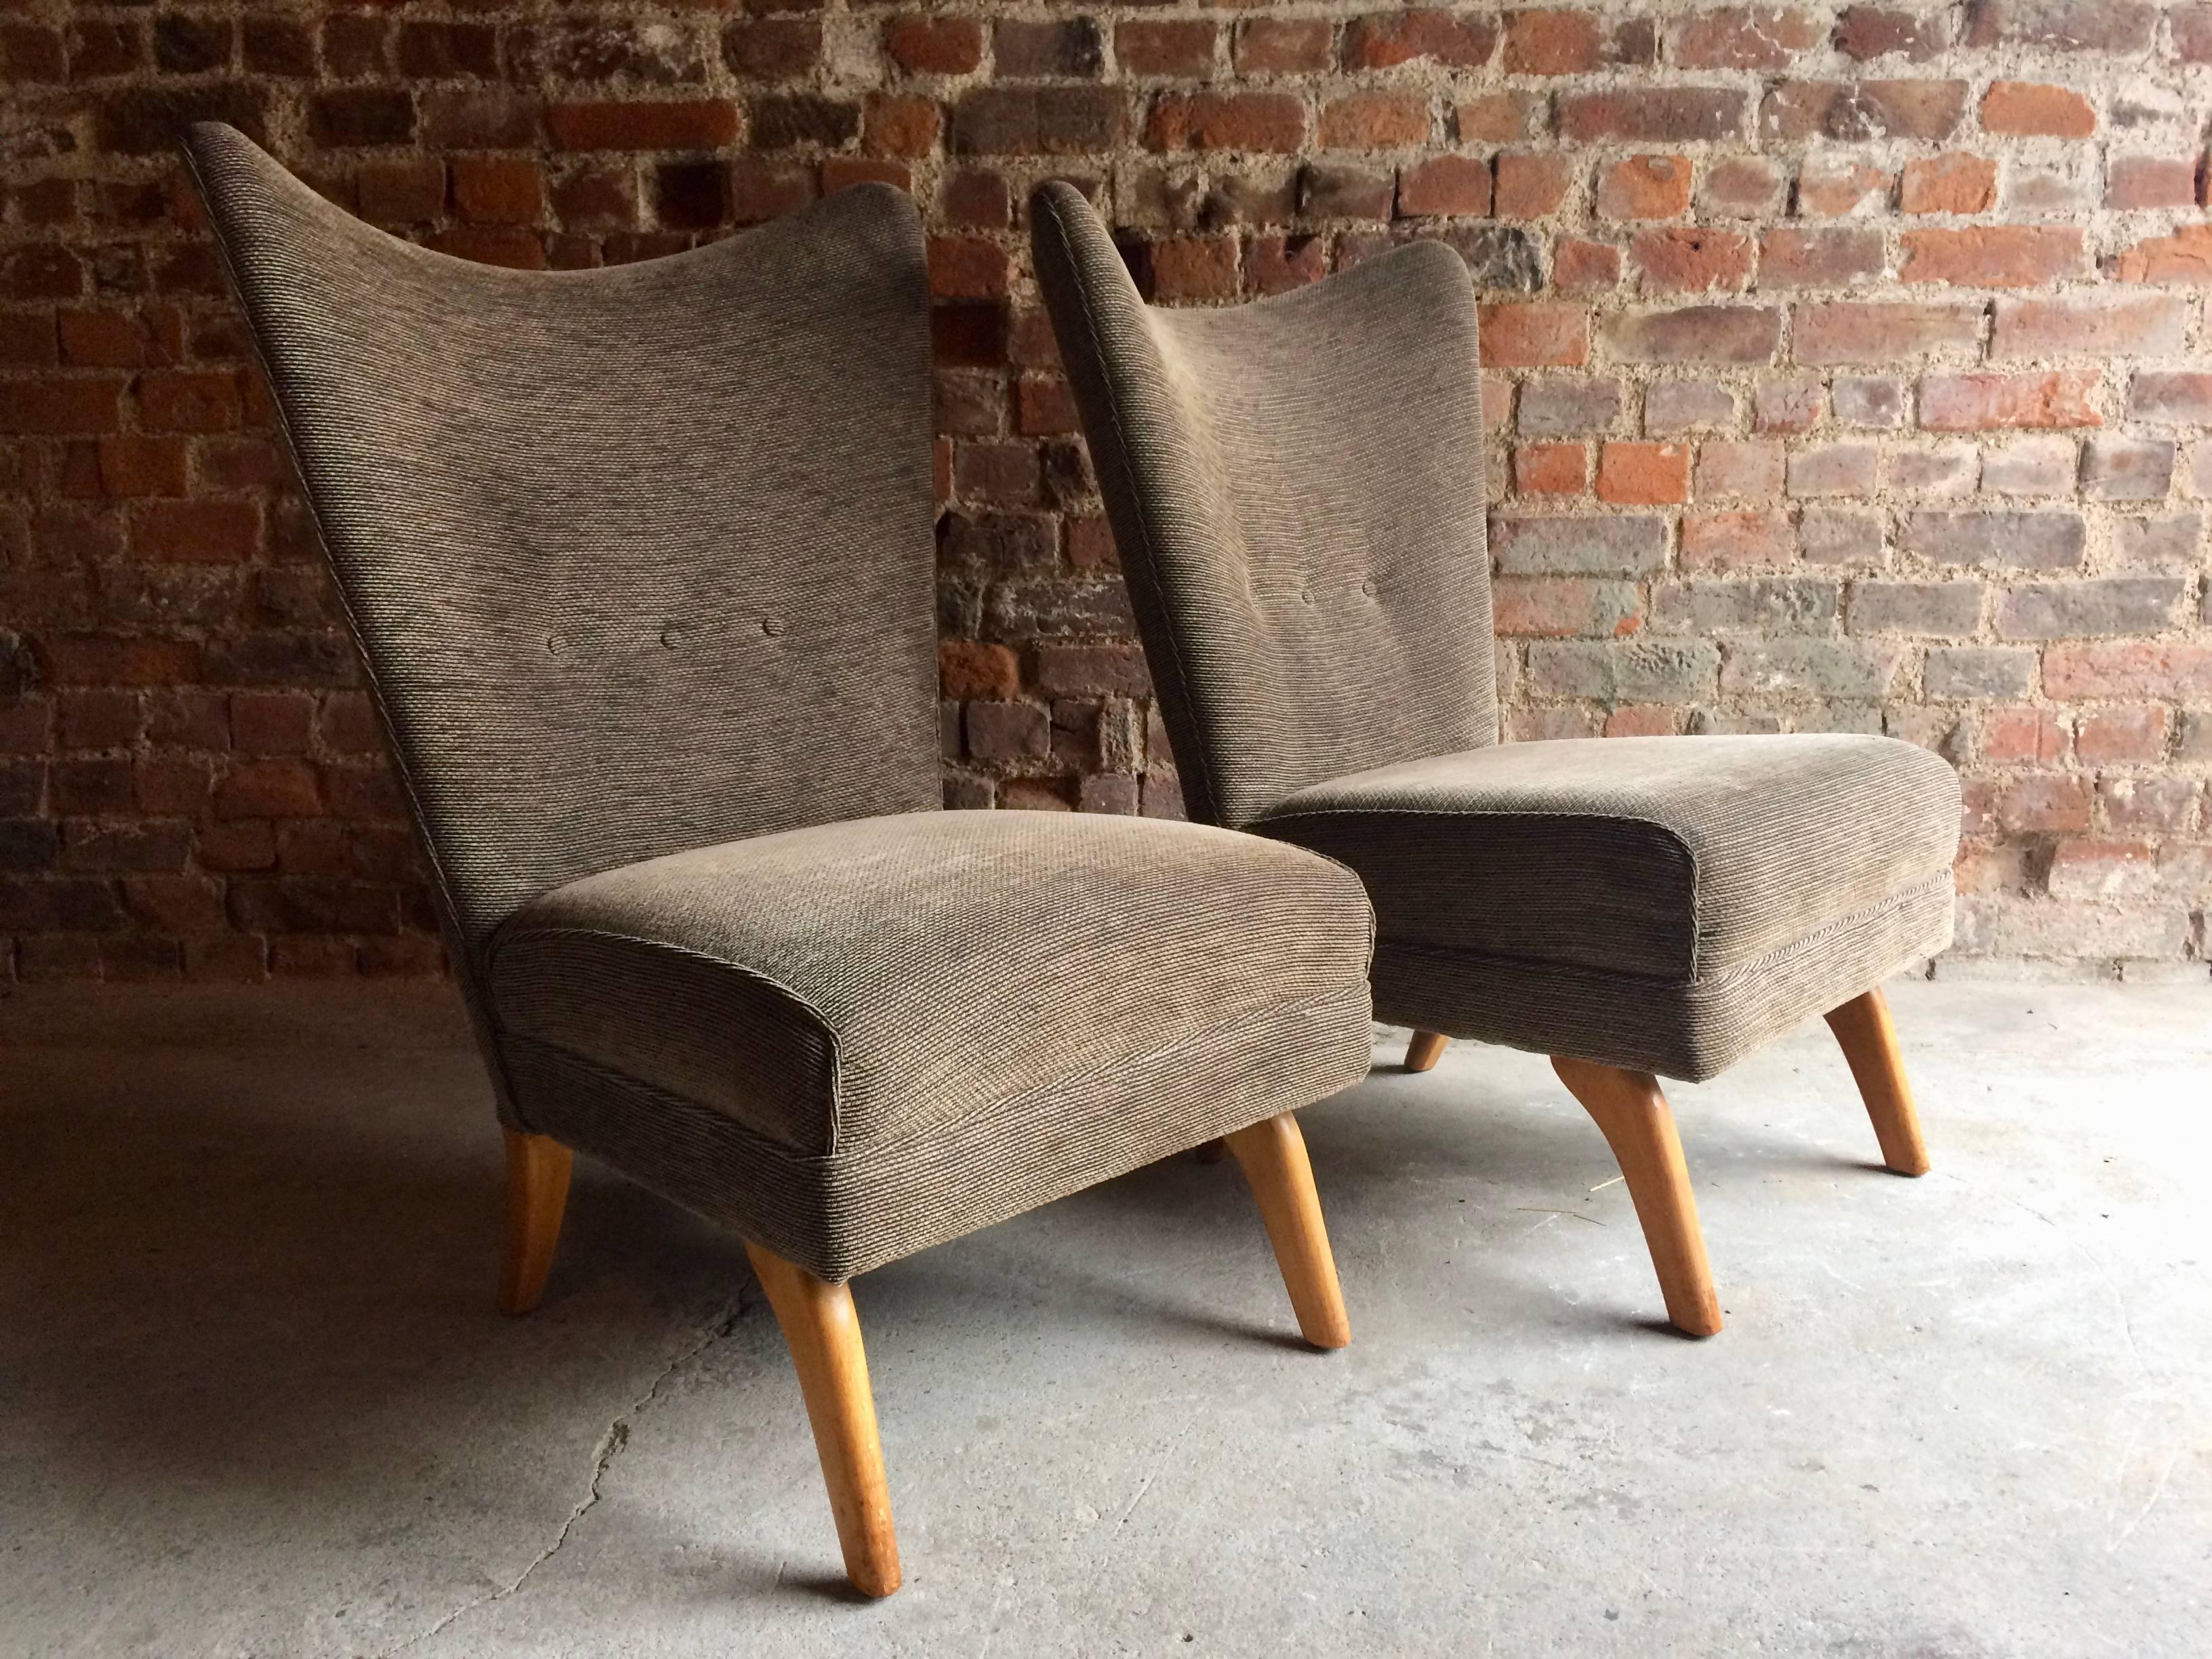 A beautiful pair of Howard Keith 'Encore' cocktail chairs offered in excellent, recently reupholstered in tweed style fabric in mink brown, designed and produced by Howard Keith under the HK brand, the Encore chair elegantly styled with a low, deep